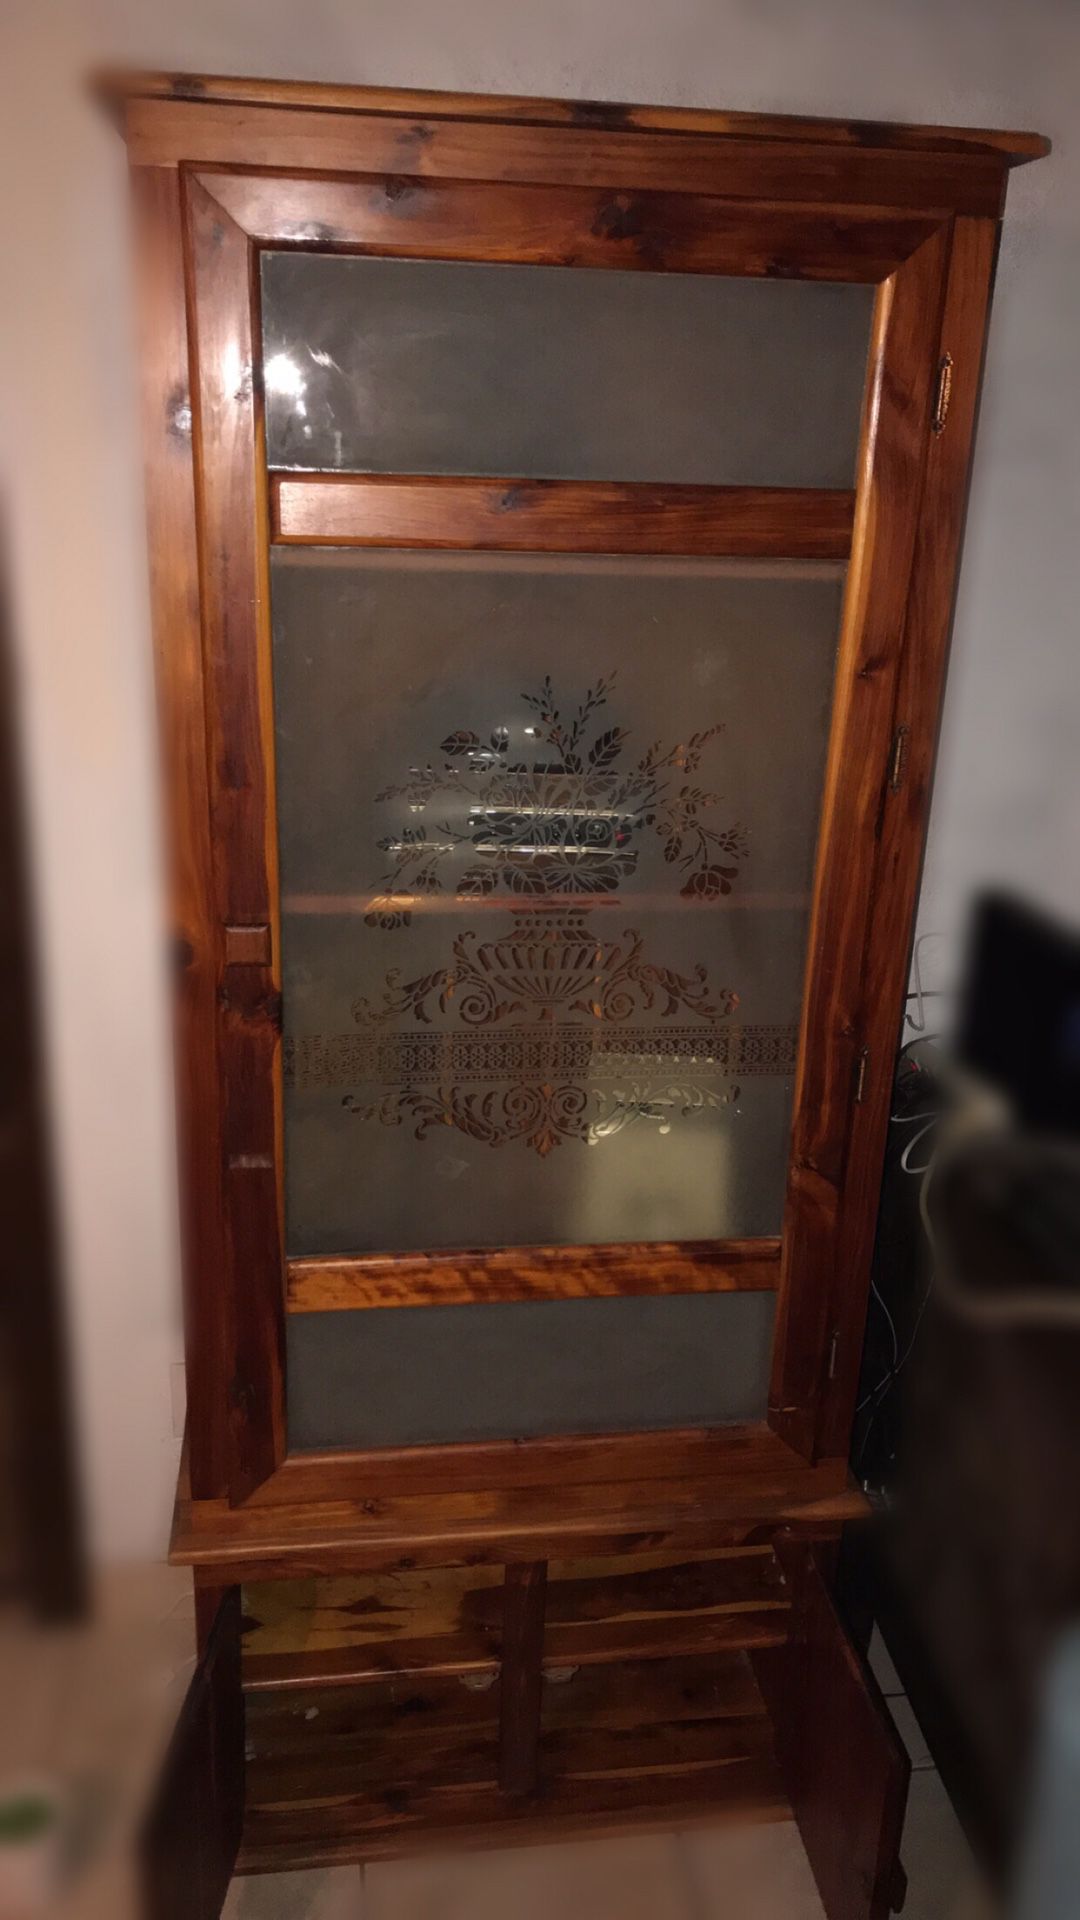 (Vintage Wood Gun Cabinet) You are able to remove the shelves to store your rifles.